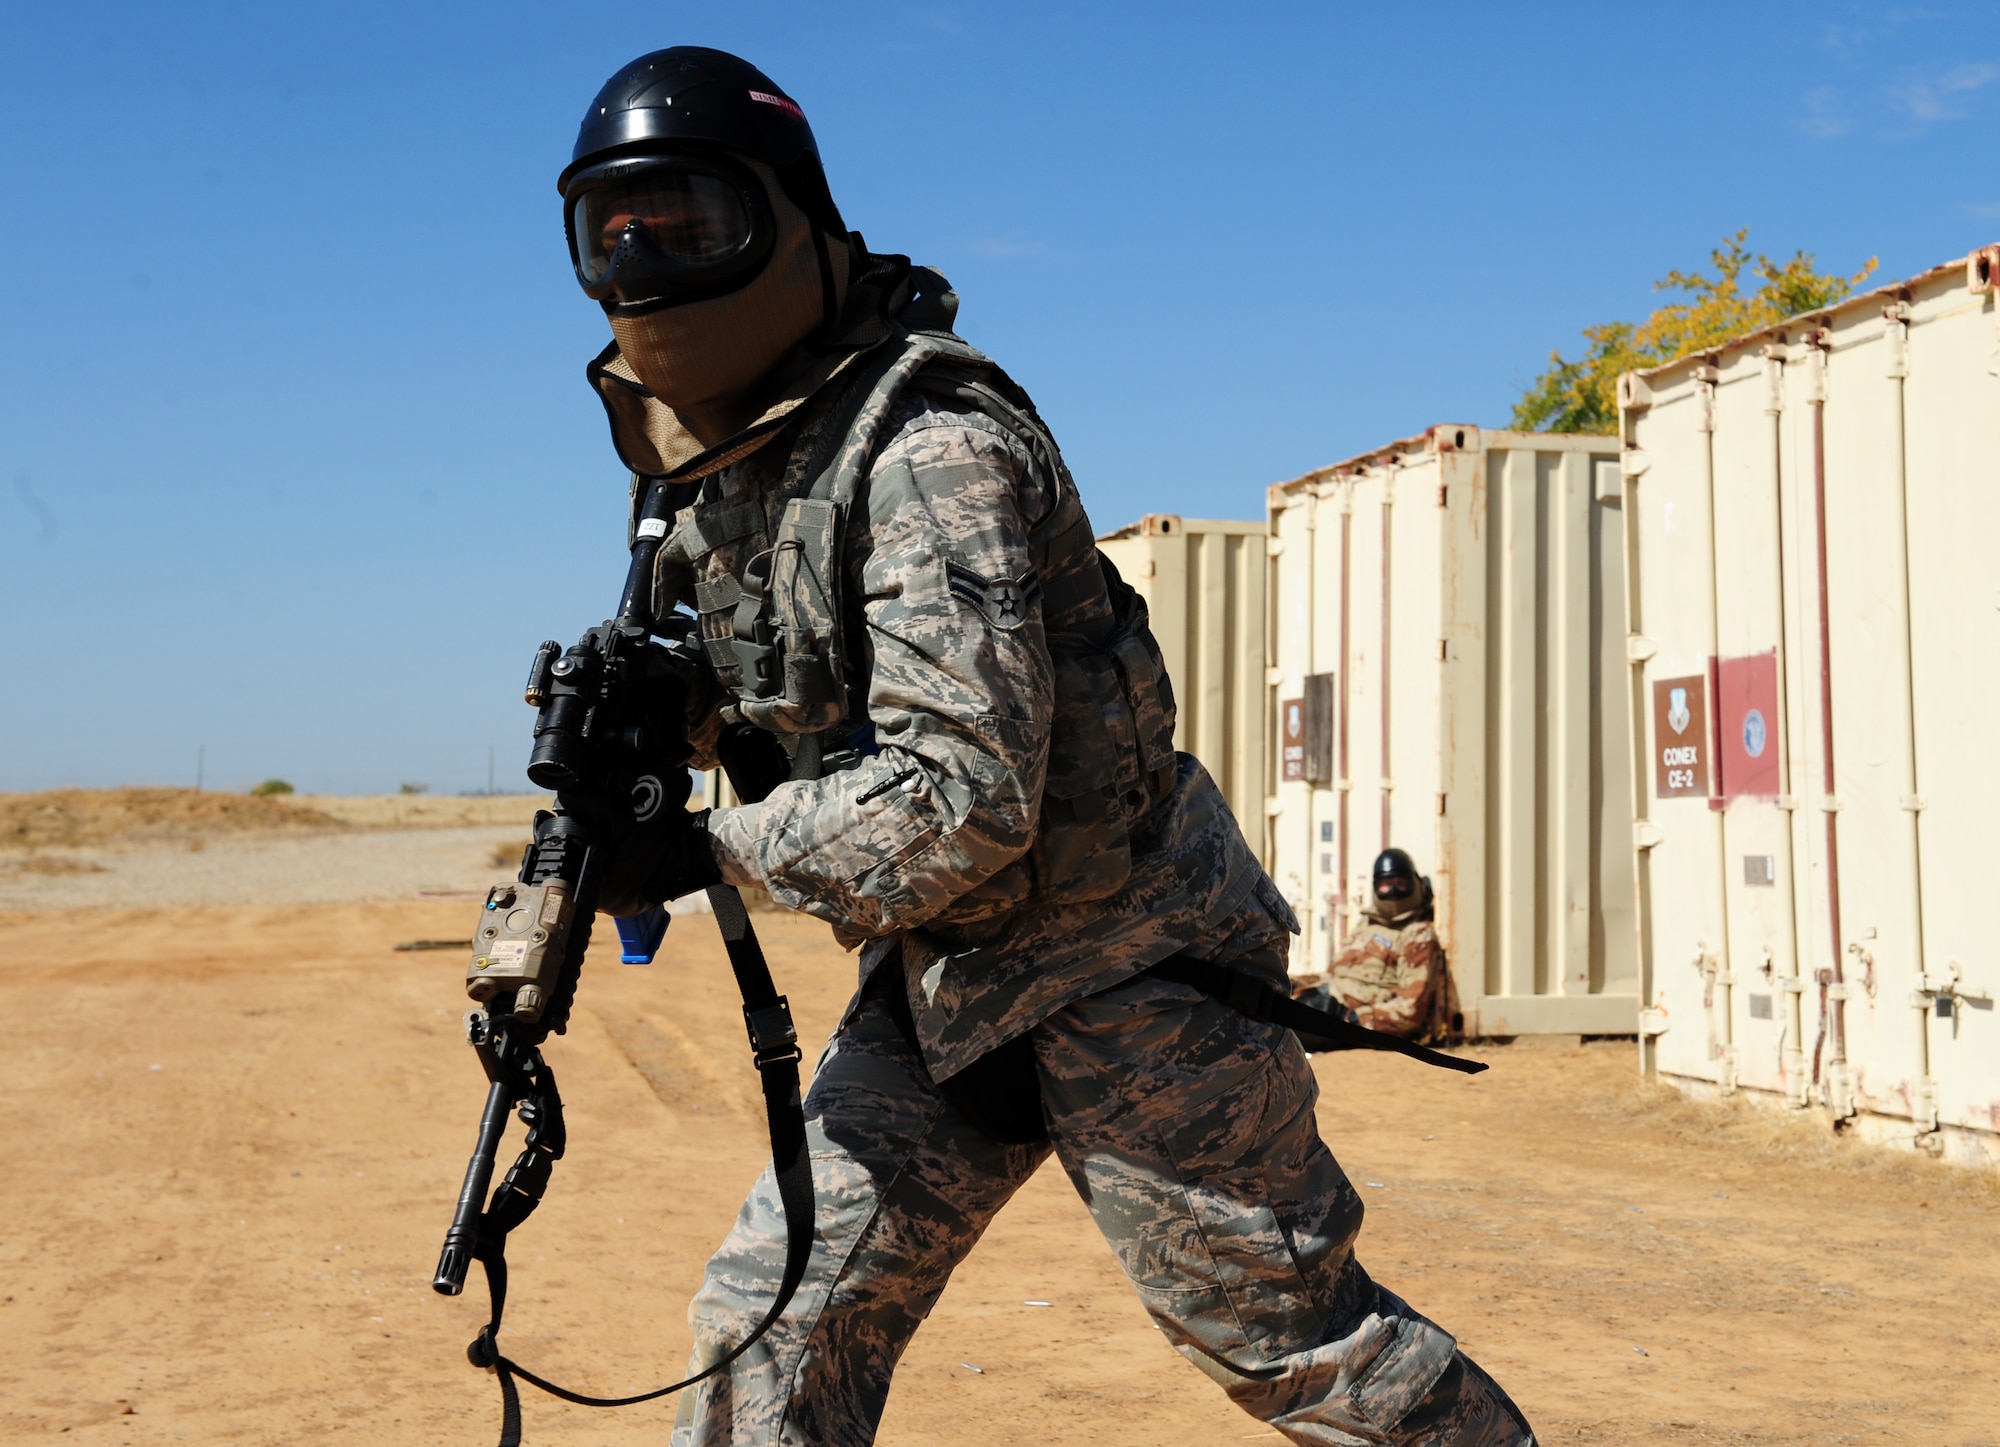 An Airman from the 9th Security Forces Squadron moves into position during a pilot-rescue exercise at Beale Air Force Base, Calif., Oct. 9, 2013. Airmen exchanged simulation munitions fire with opposition forces throughout the exercise, which offered more realism to the scenario. (U.S. Air Force photo by Airman 1st Class Bobby Cummings/Released)